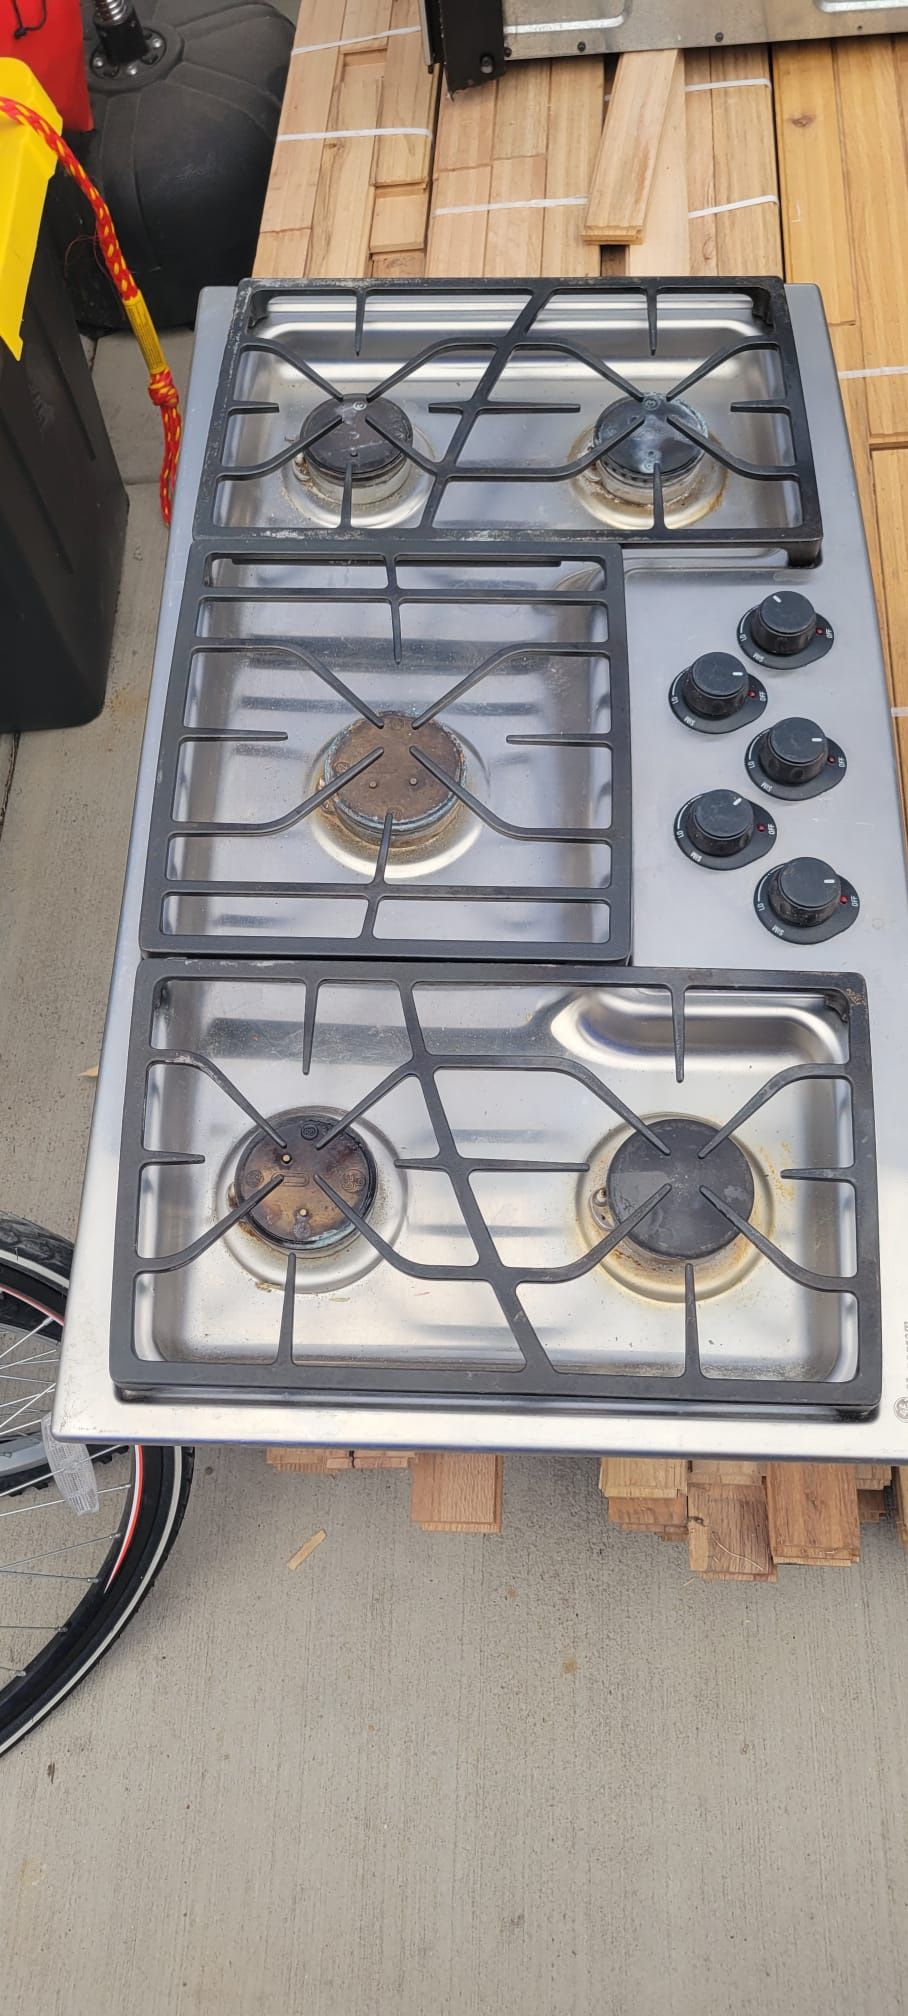 Kitchen island Cooktop With Vent